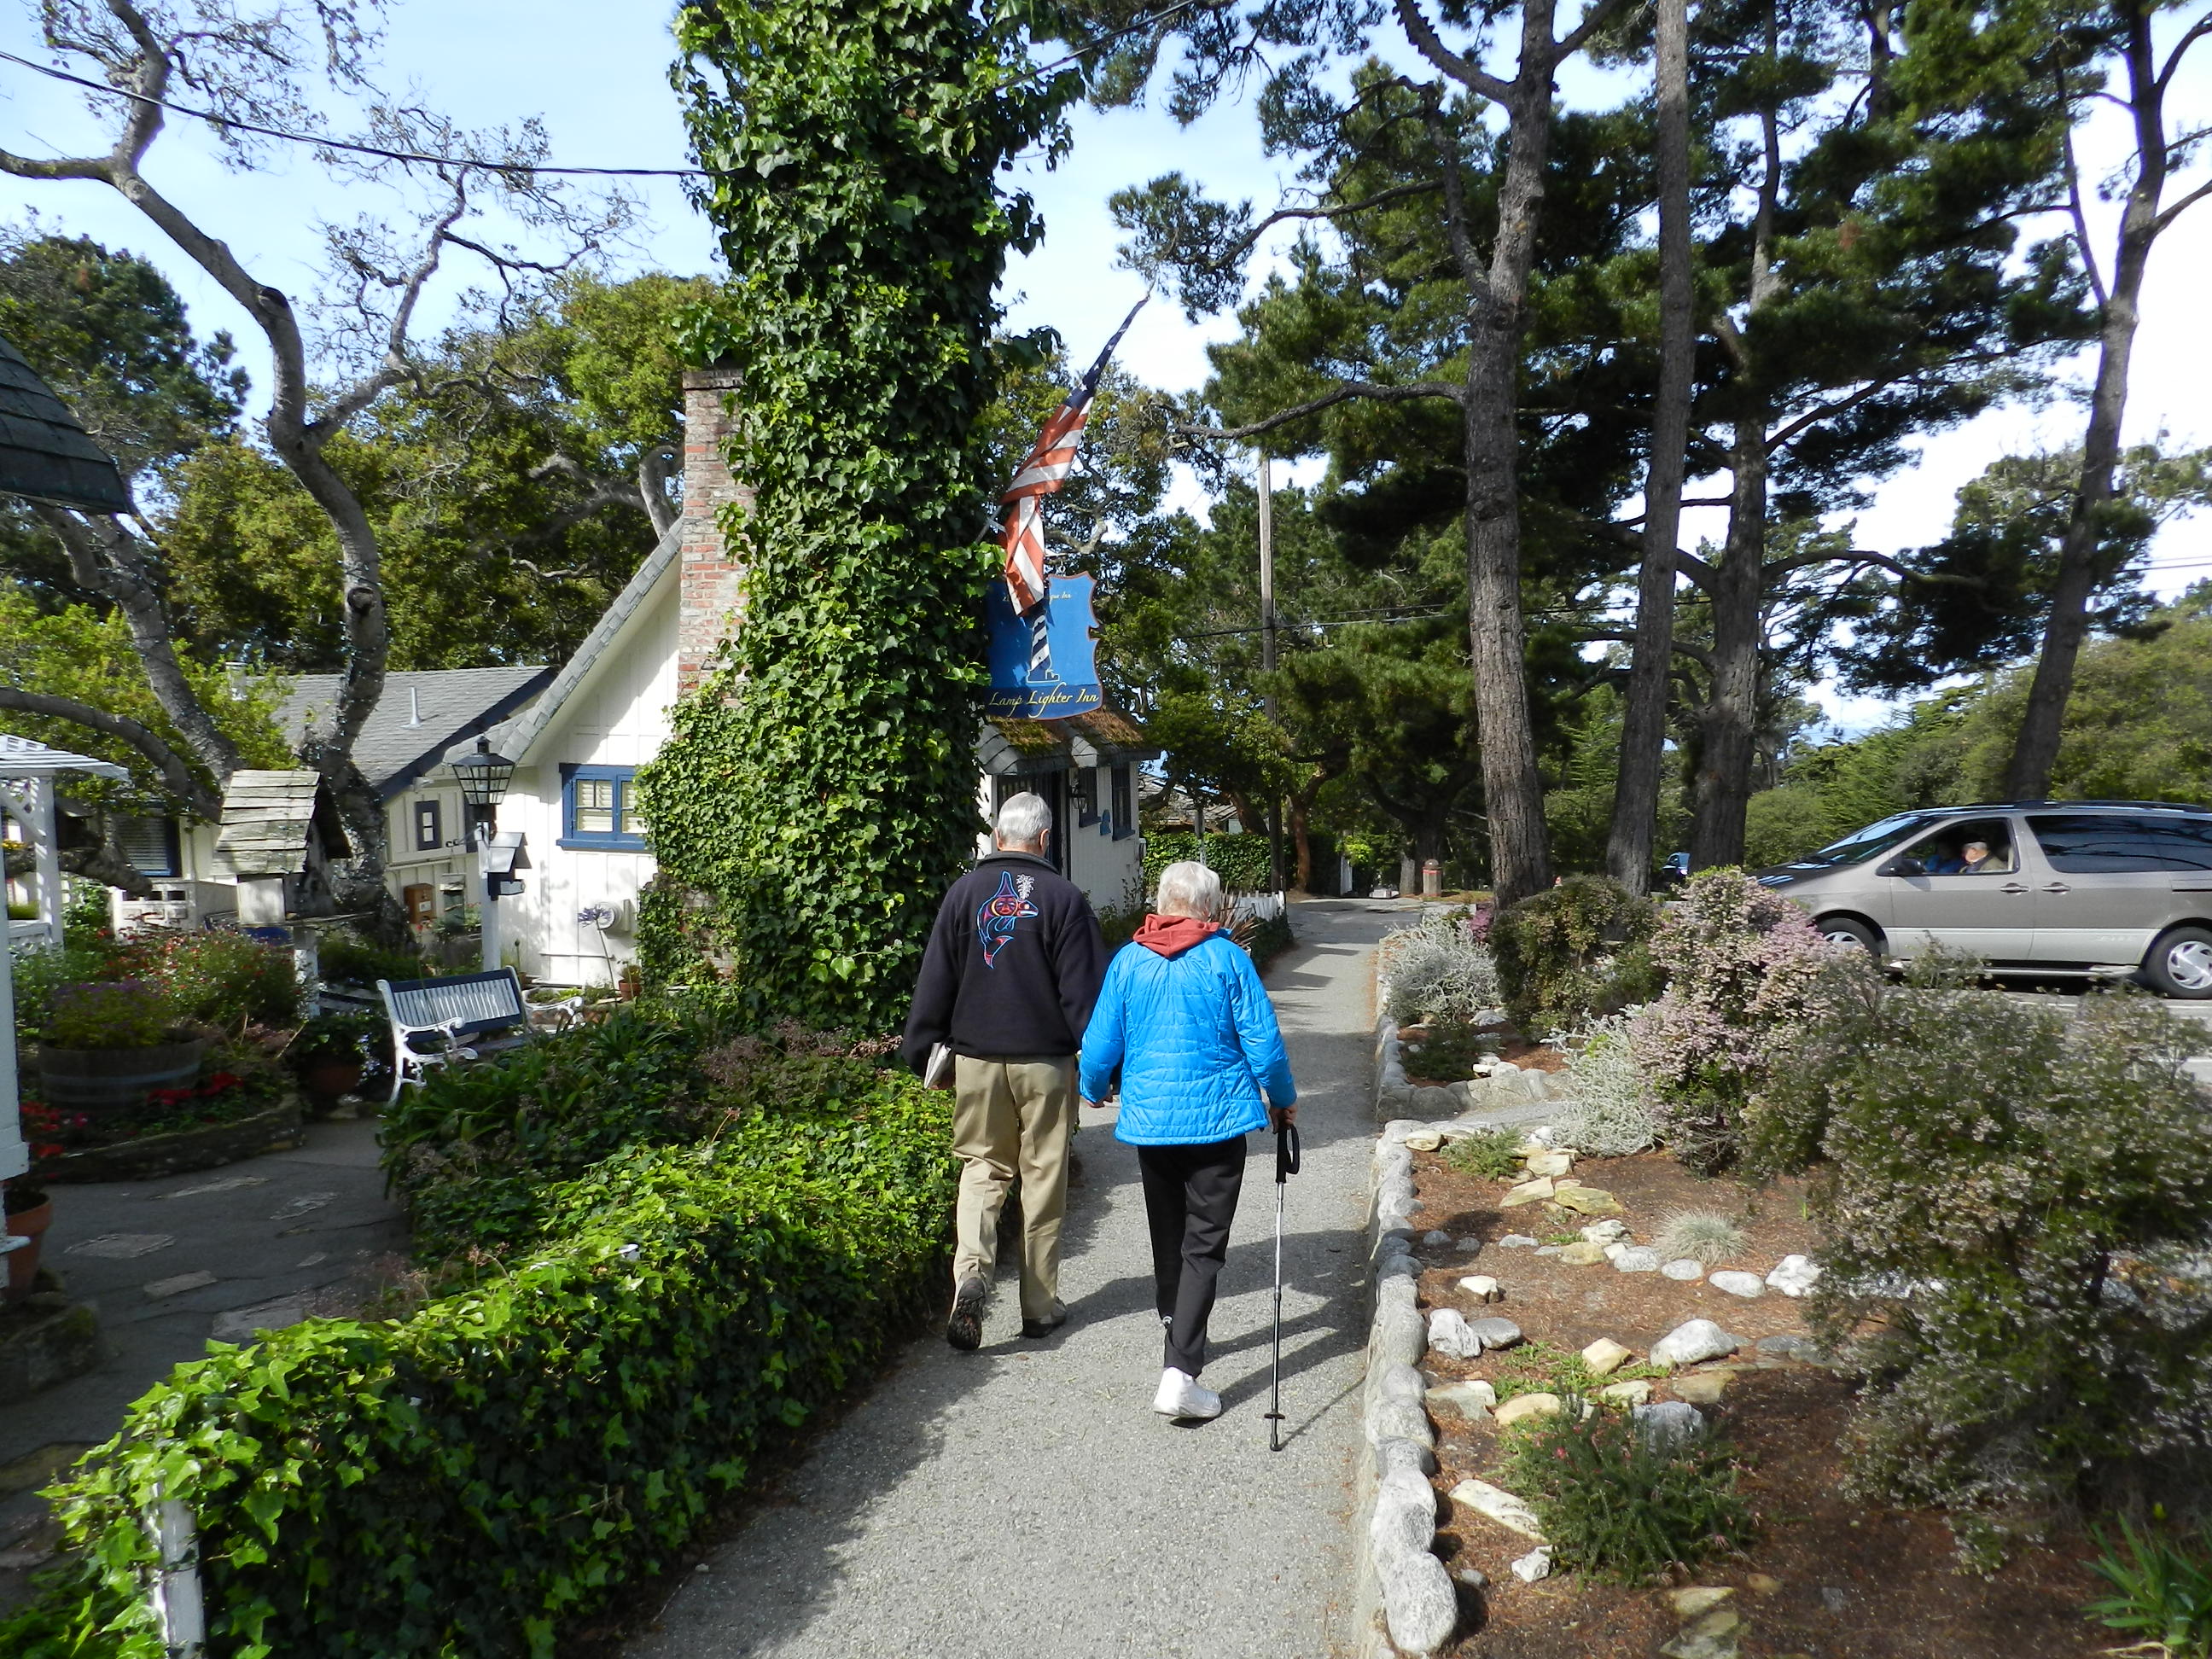 Carmel by the sea - highway 1 california dicas